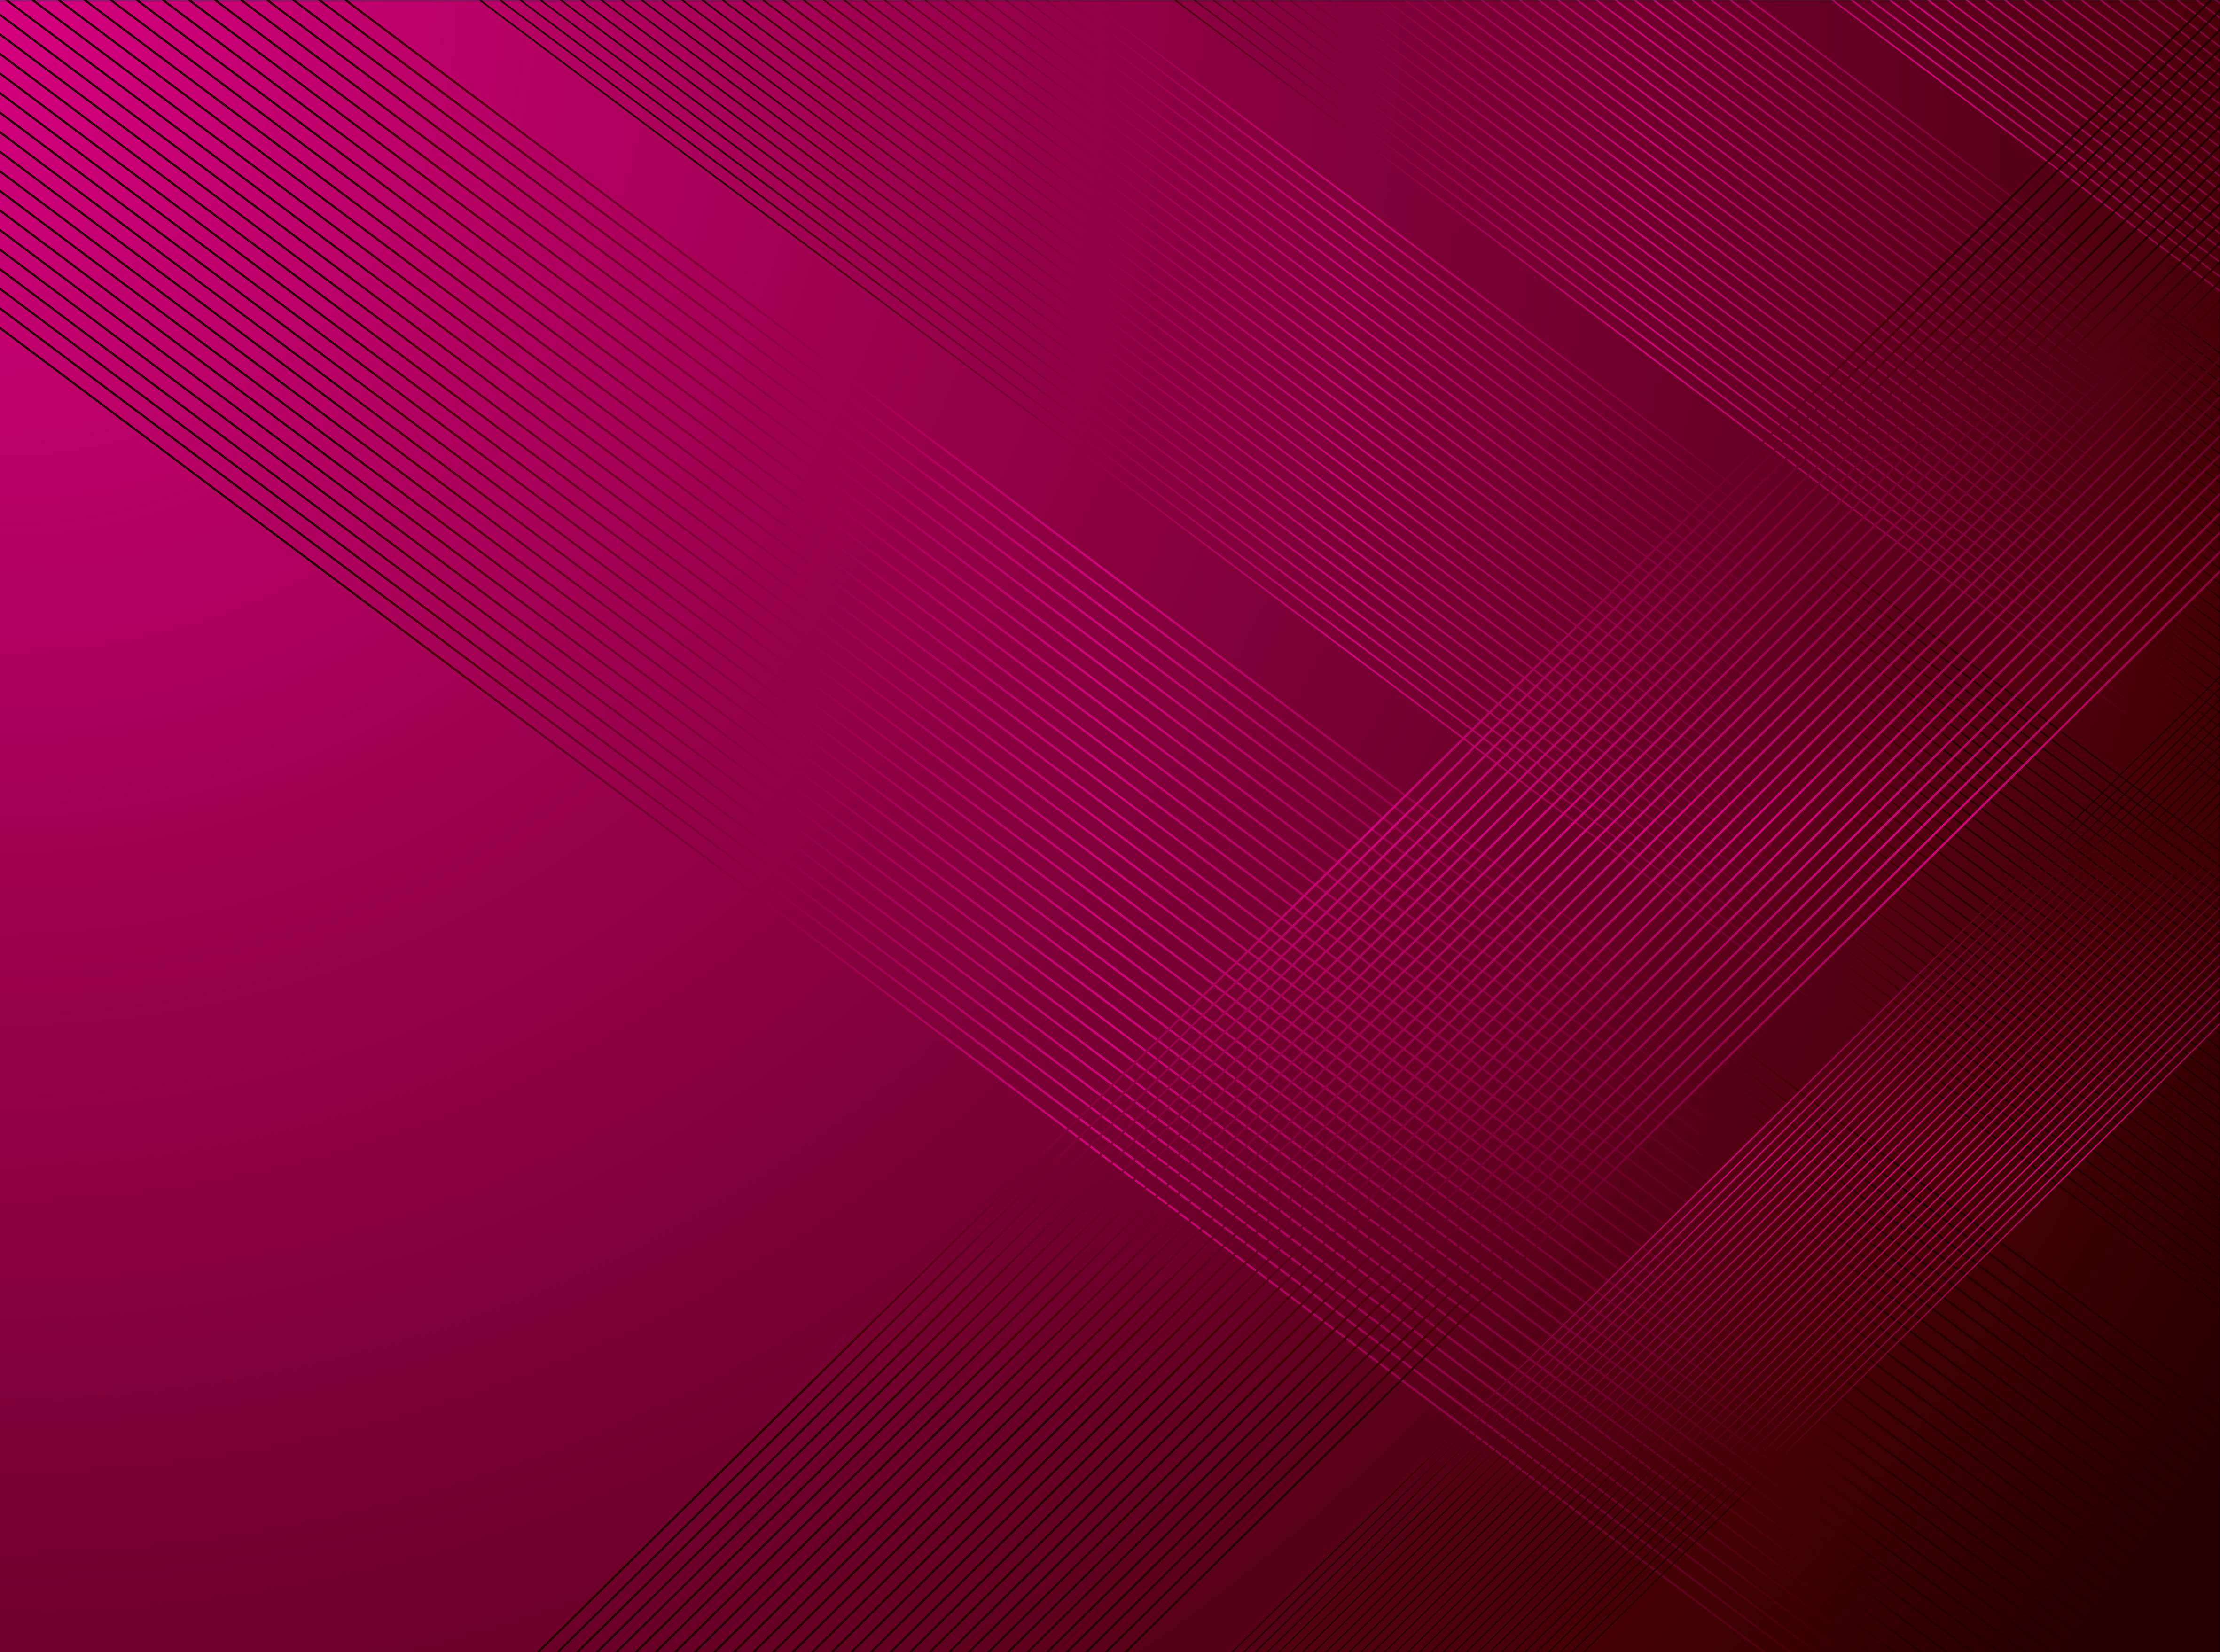 An Abstract Magenta Background With Flowing Line That Appear Like Rows